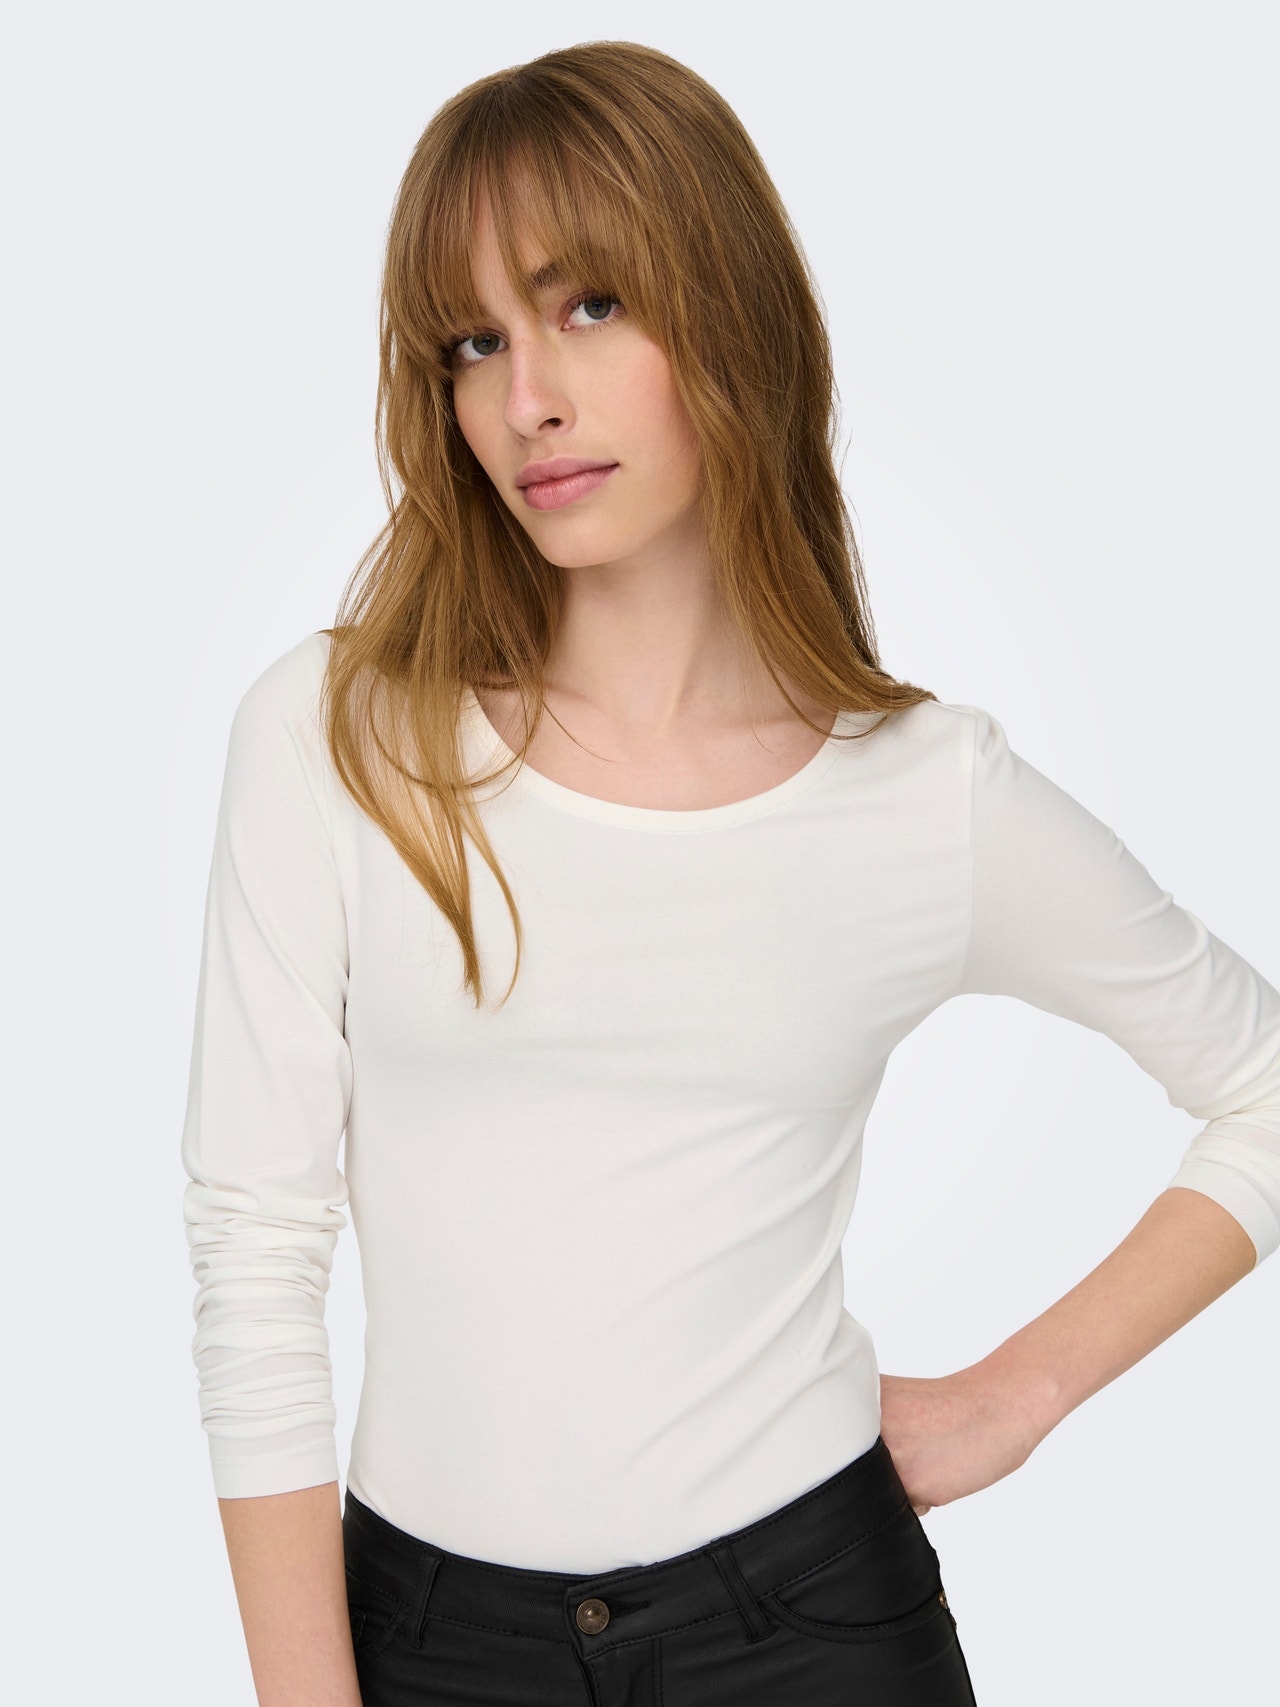 ONLY Tight fitted top -Cloud Dancer - 15300684